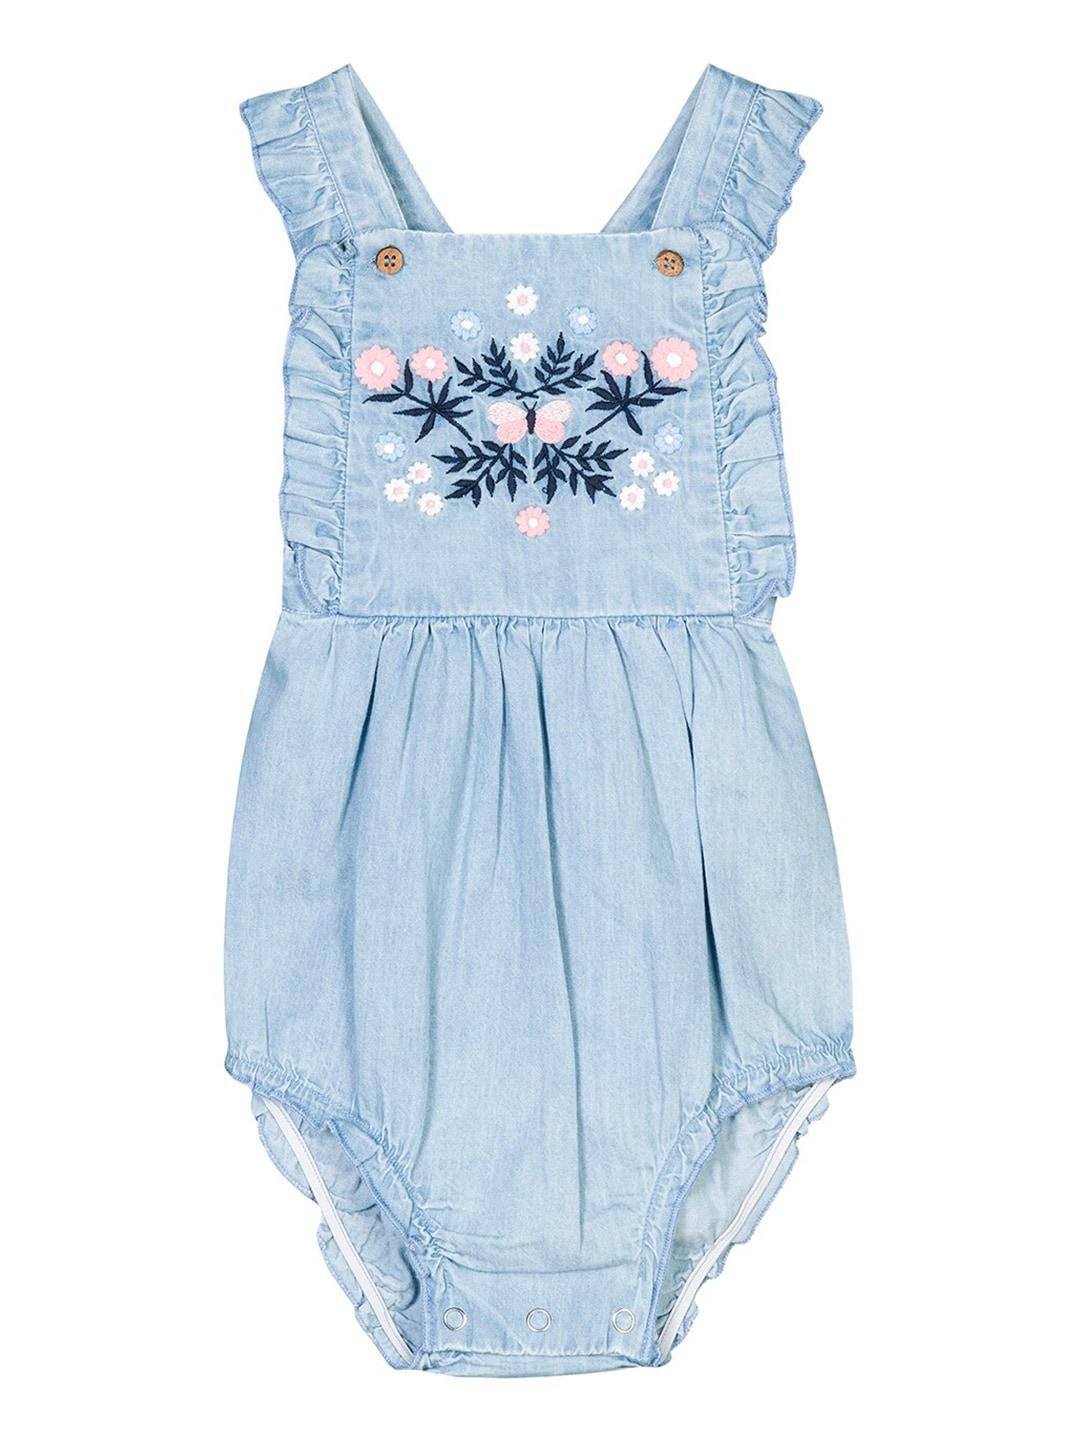 Budding Bees Infant Girls Blue Denim Embroidered Rompers With Ruffles Detail